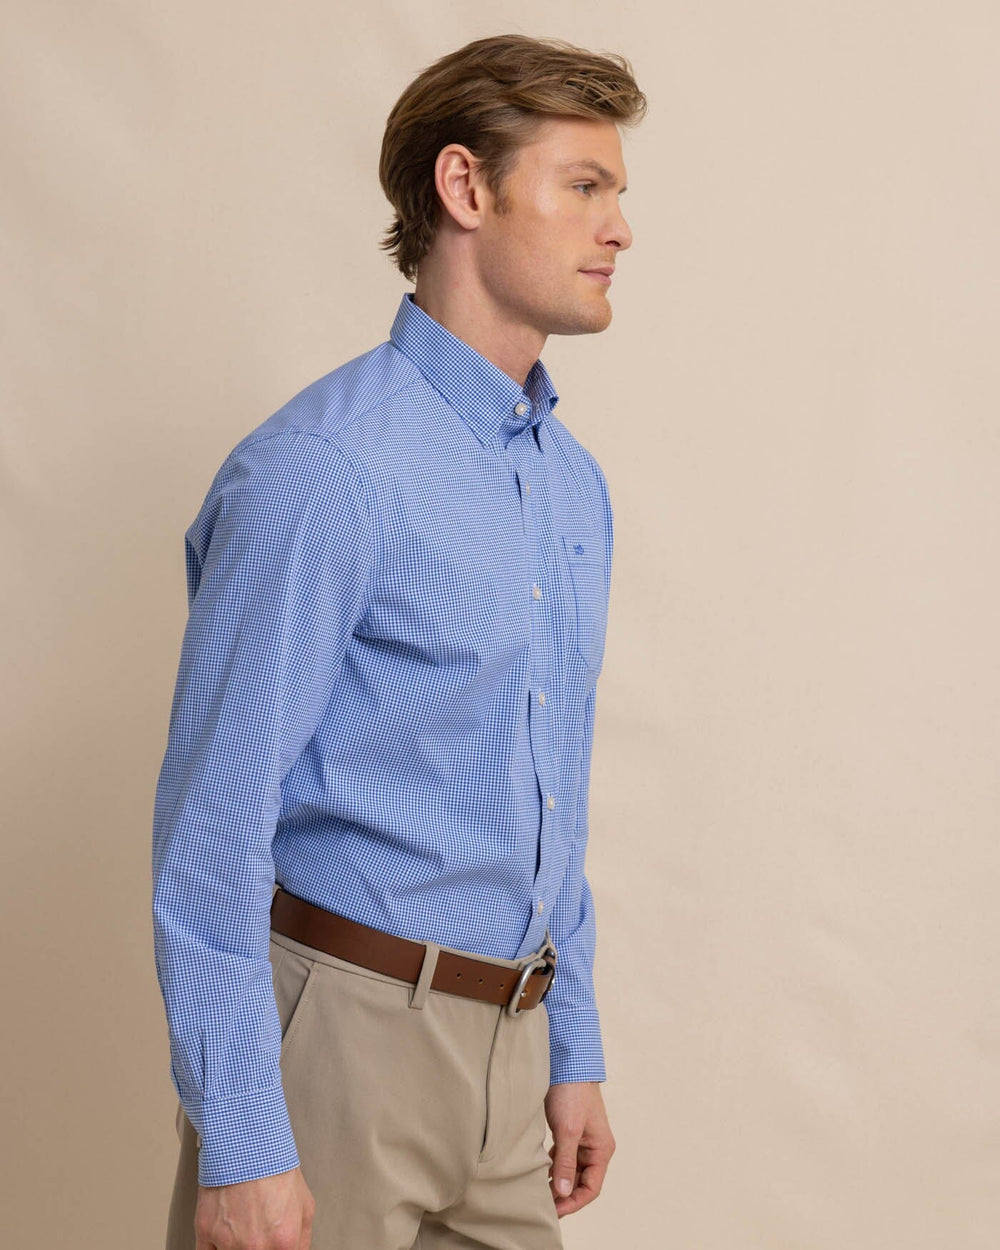 The front view of the Southern Tide Charleston Parkwood Microgingham Long Sleeve Sport Shirt by Southern Tide - Cobalt Blue